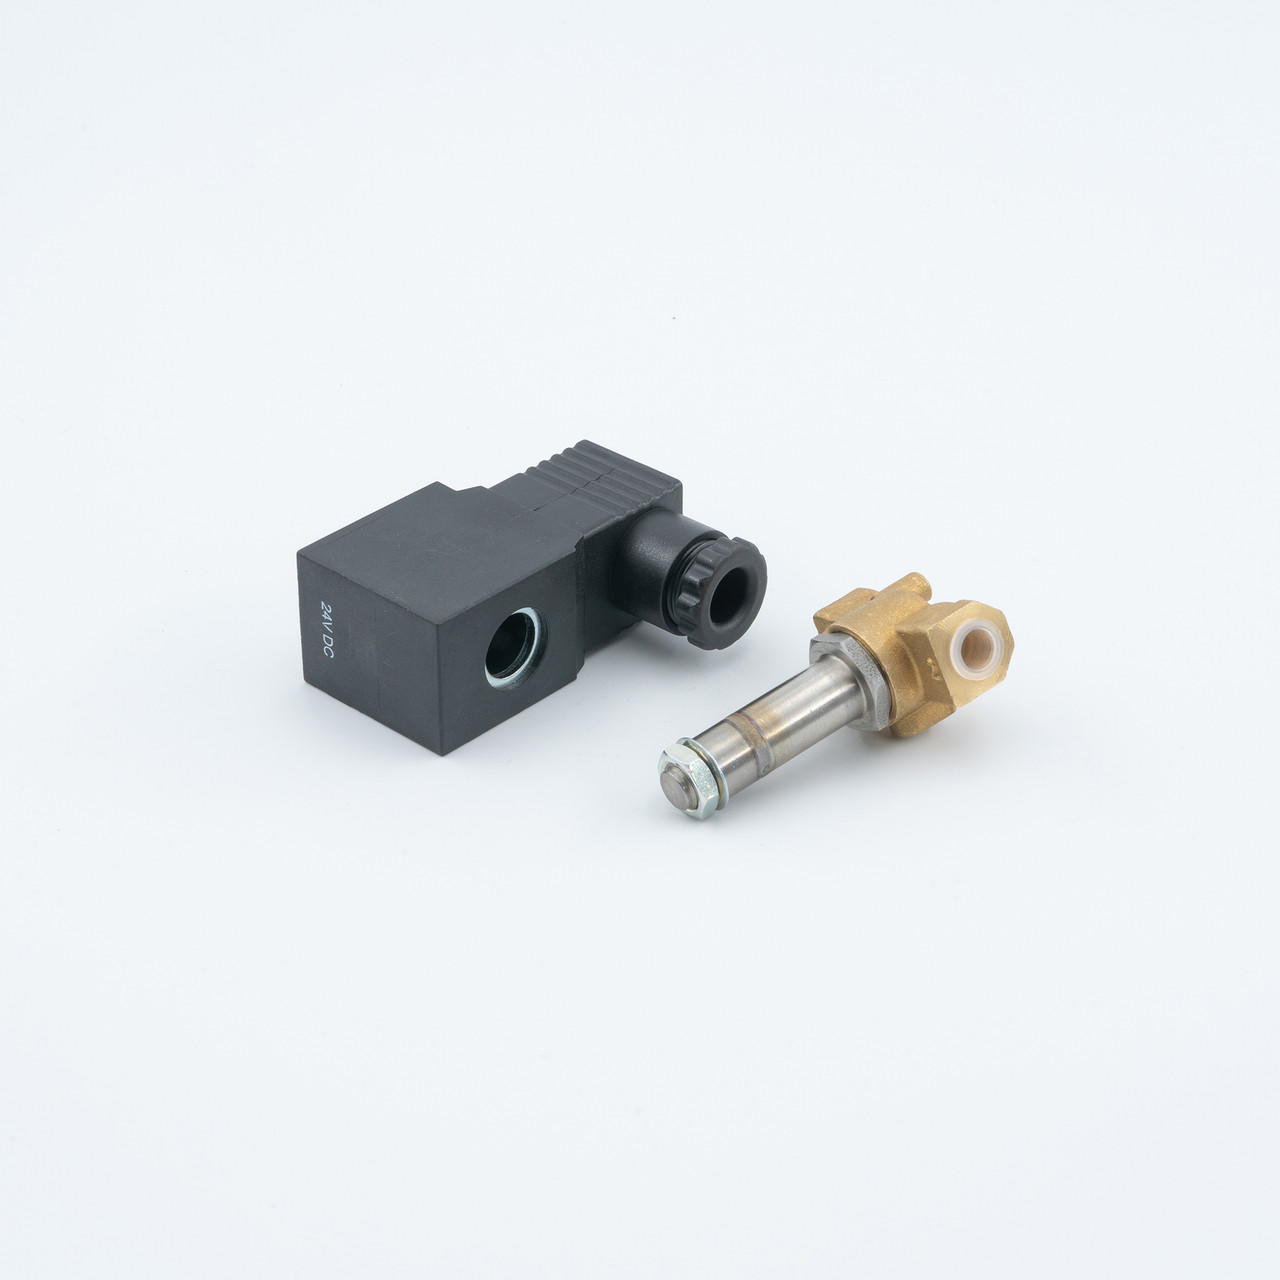 PolyPrint Pretreater Pro Solenoid Valve Coil PP-04259 set, Contact American  Print Consultants Today!